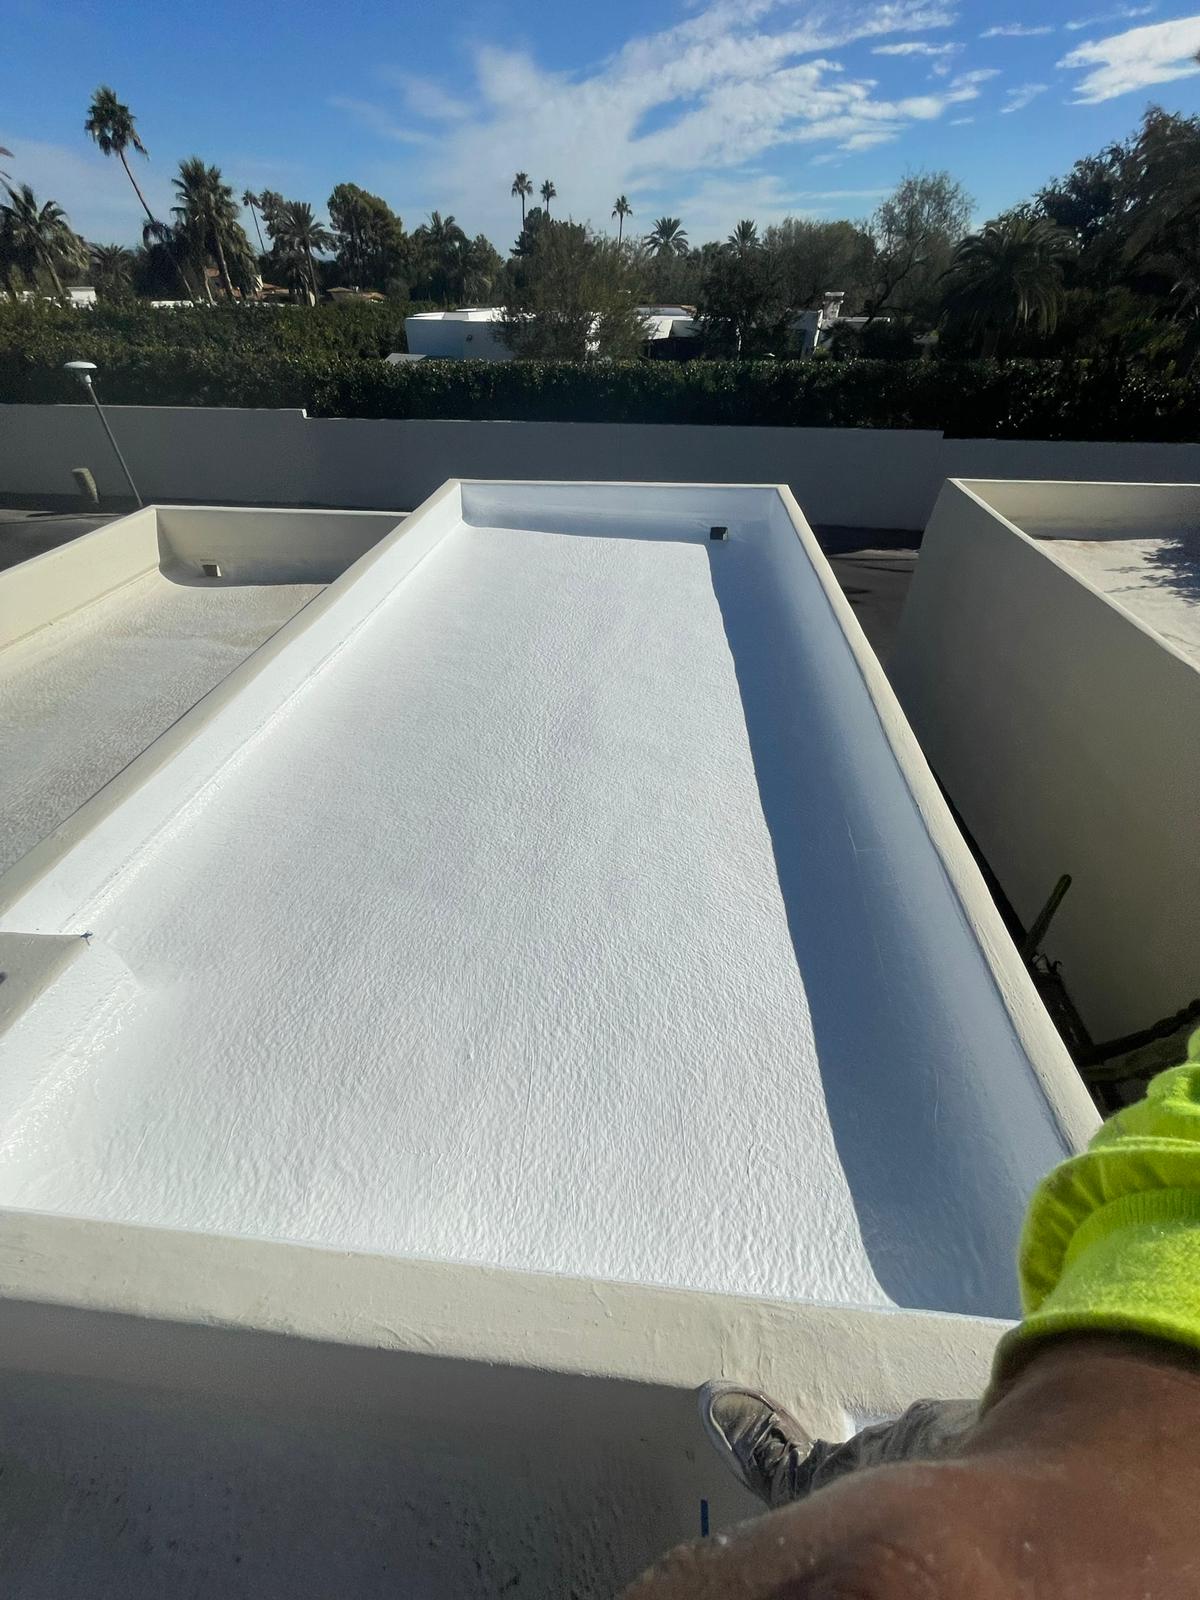 A finished foam roof showcasing a spray foam and coating installation in Scottsdale.